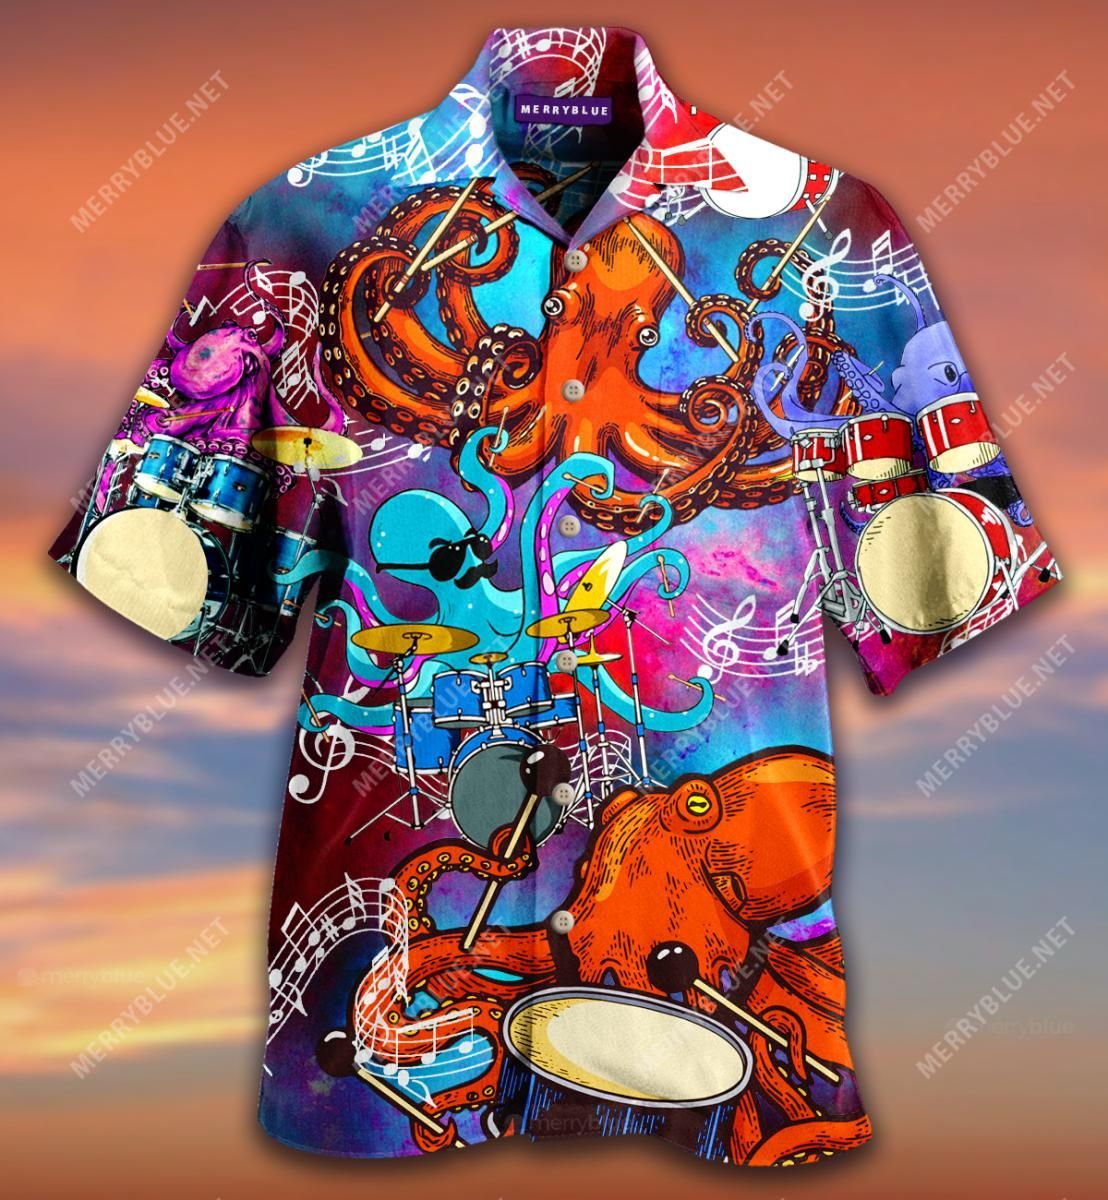 Dance To The Beat Of Your Own Drum Octopus Aloha Hawaiian Shirt Colorful Short Sleeve Summer Beach Casual Shirt For Men And Women